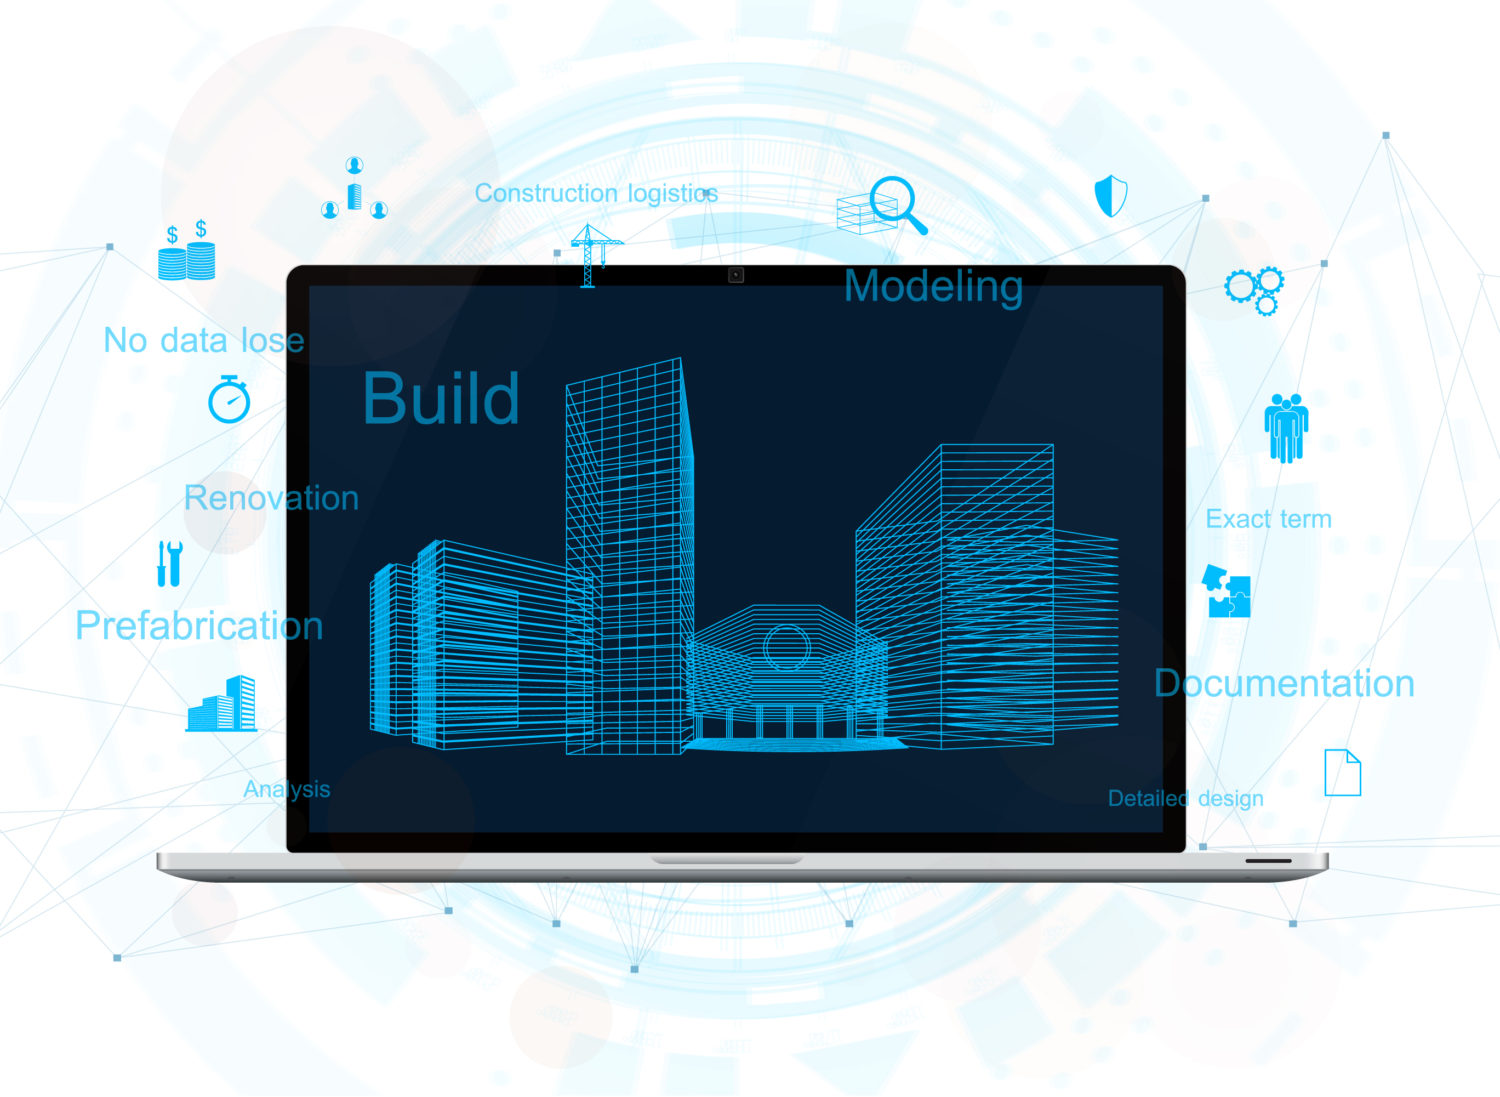 BIM SOFTWARE IN THE CLOUD INTRO BLOG IMAGE 1 1500x1097 2